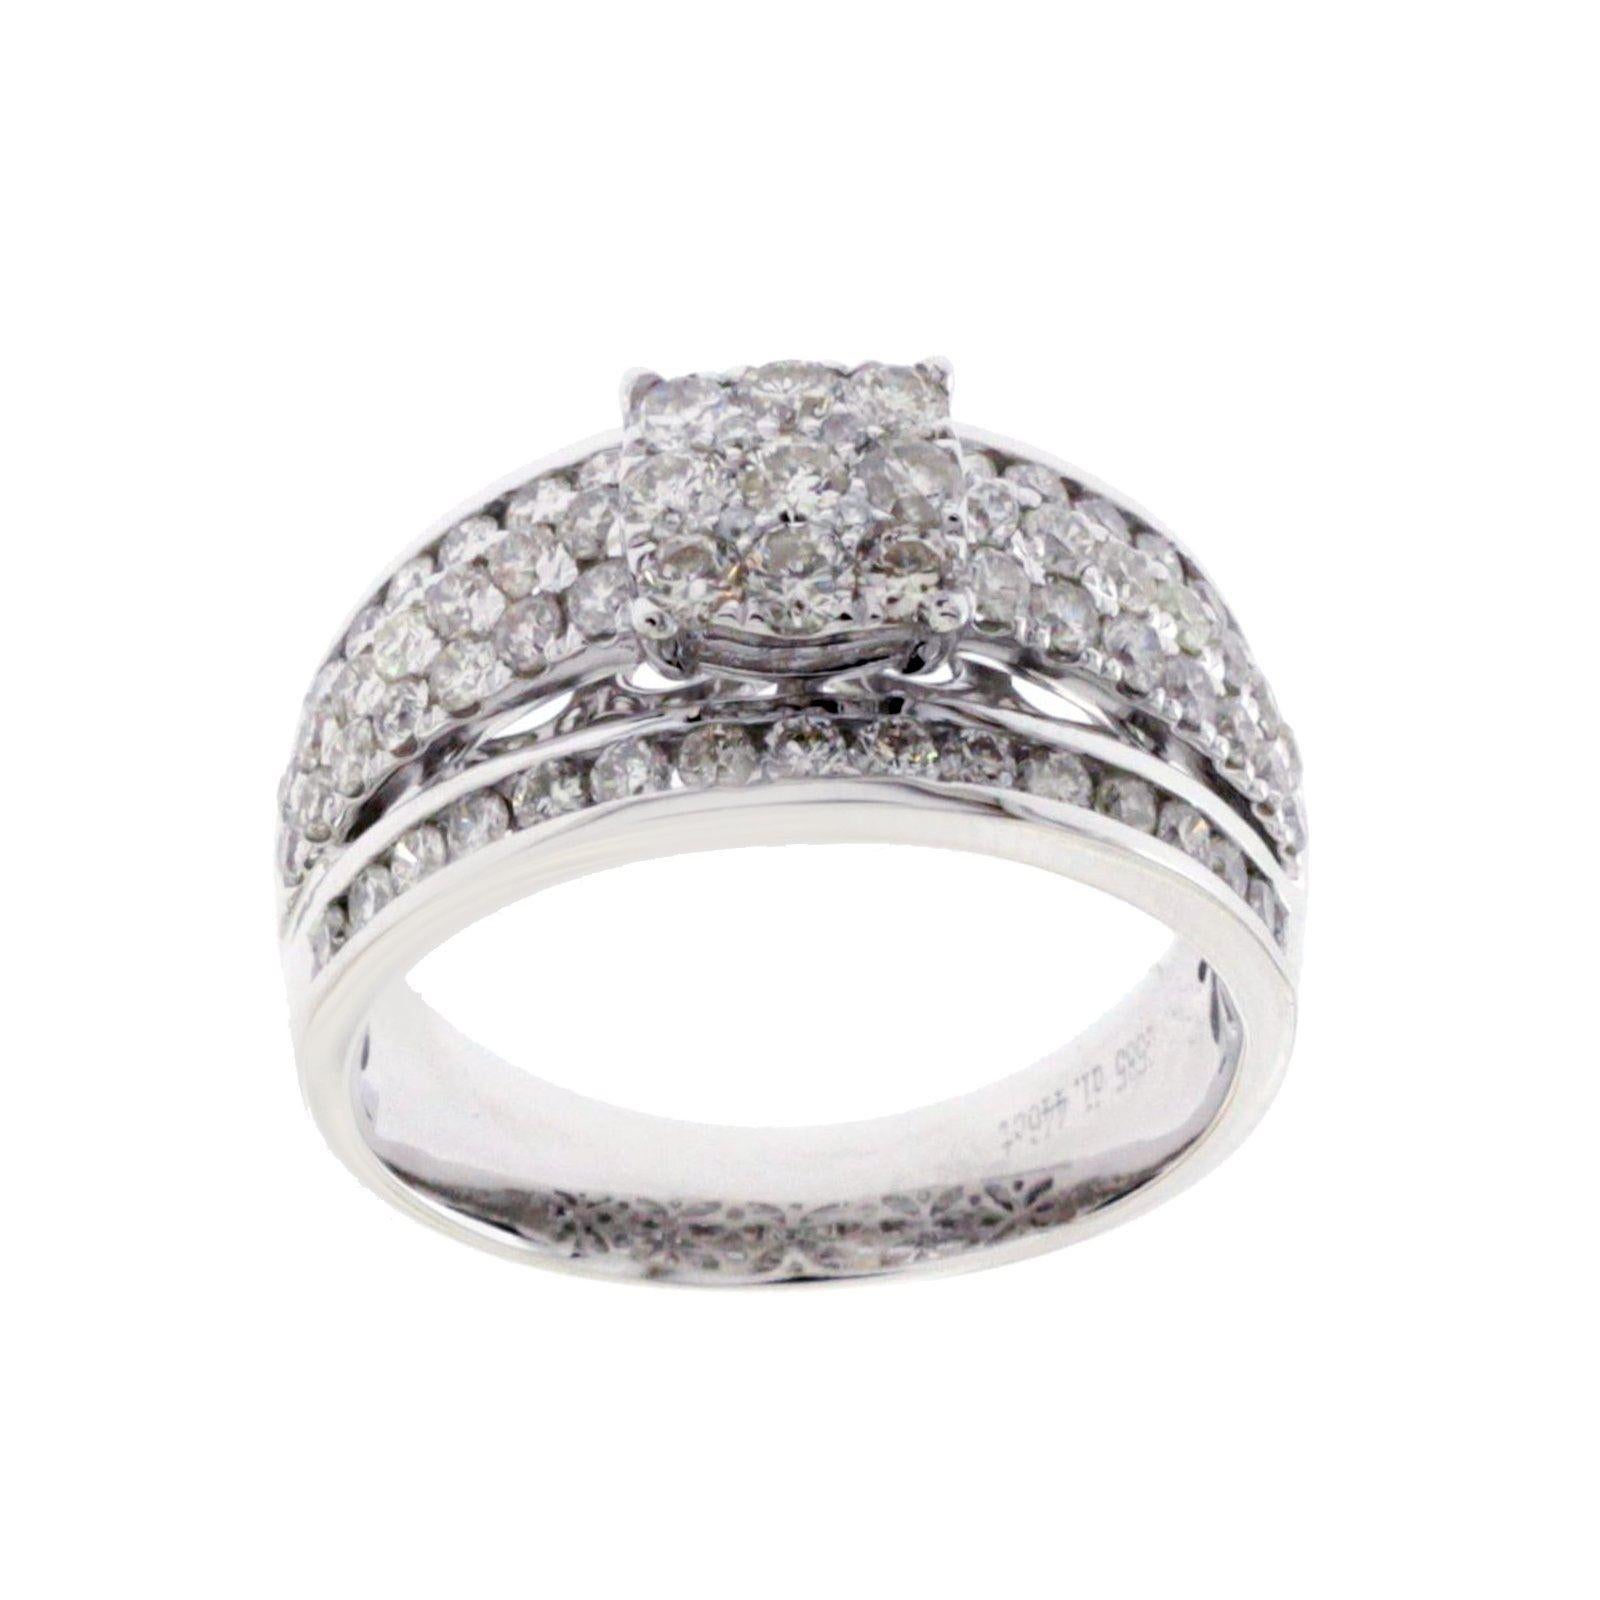 Top: 11 mm
Band Width: 5 mm
Metal: 14K White Gold 
Size: 6-9 ( Please message Us for your Size )
Hallmarks: 14K
Total Weight: 6 Grams
Stone Type: 1.44 CT G SI1 Diamonds
Condition: New
Estimated Retail Price: $2900
Stock Number: RAF10